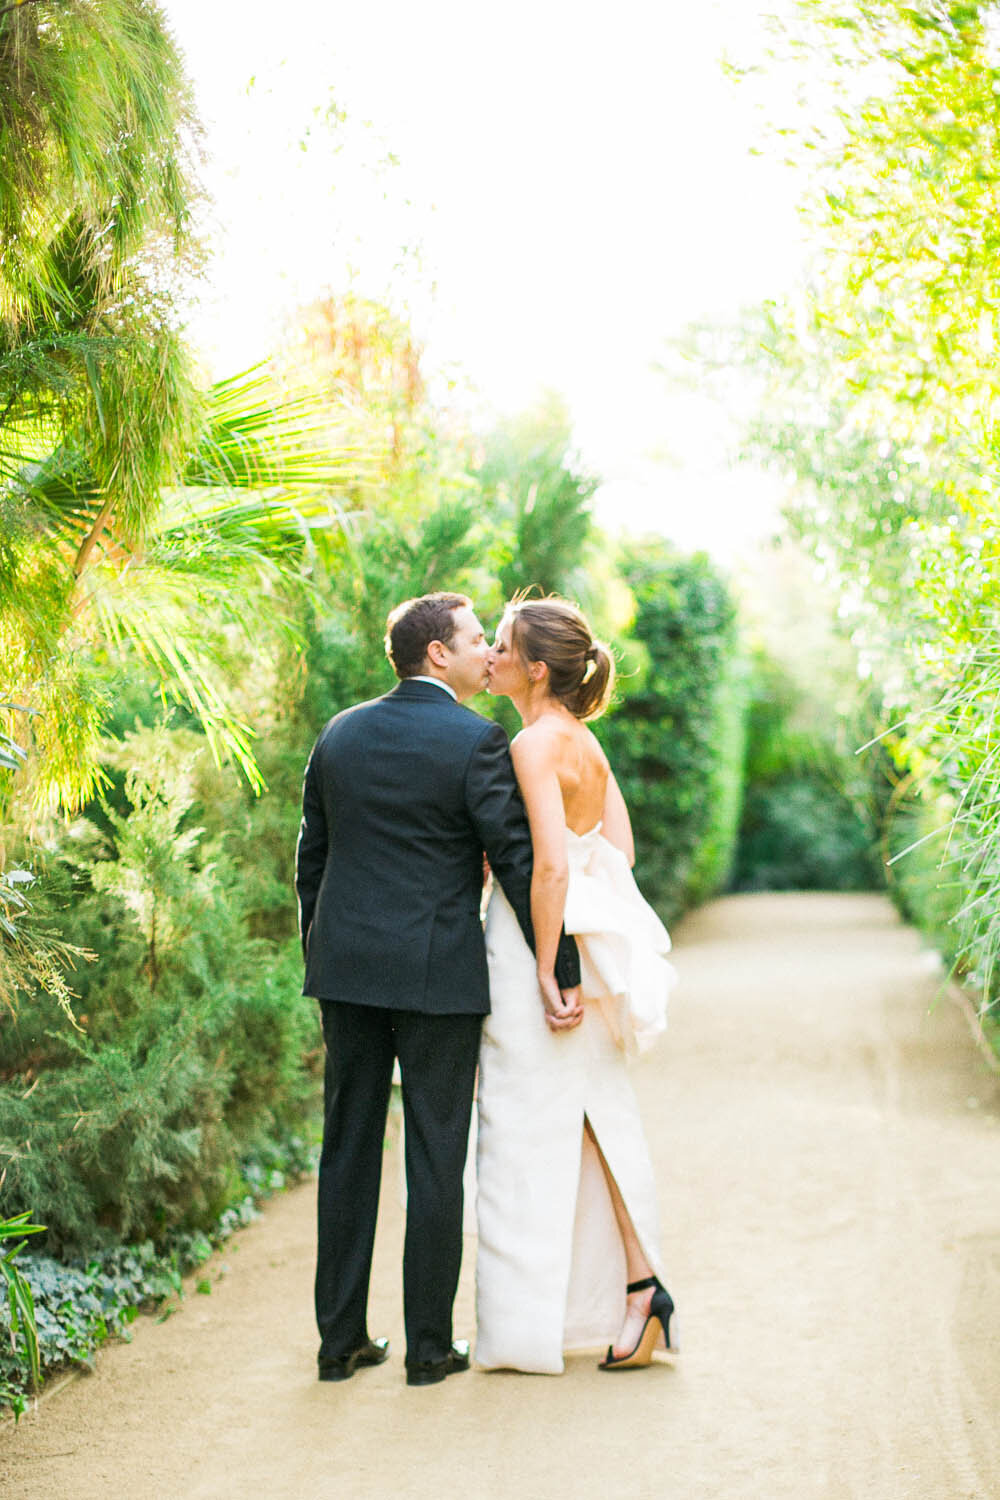 jacqueline_campbell_wedding_photography_parker_palm_springs_042